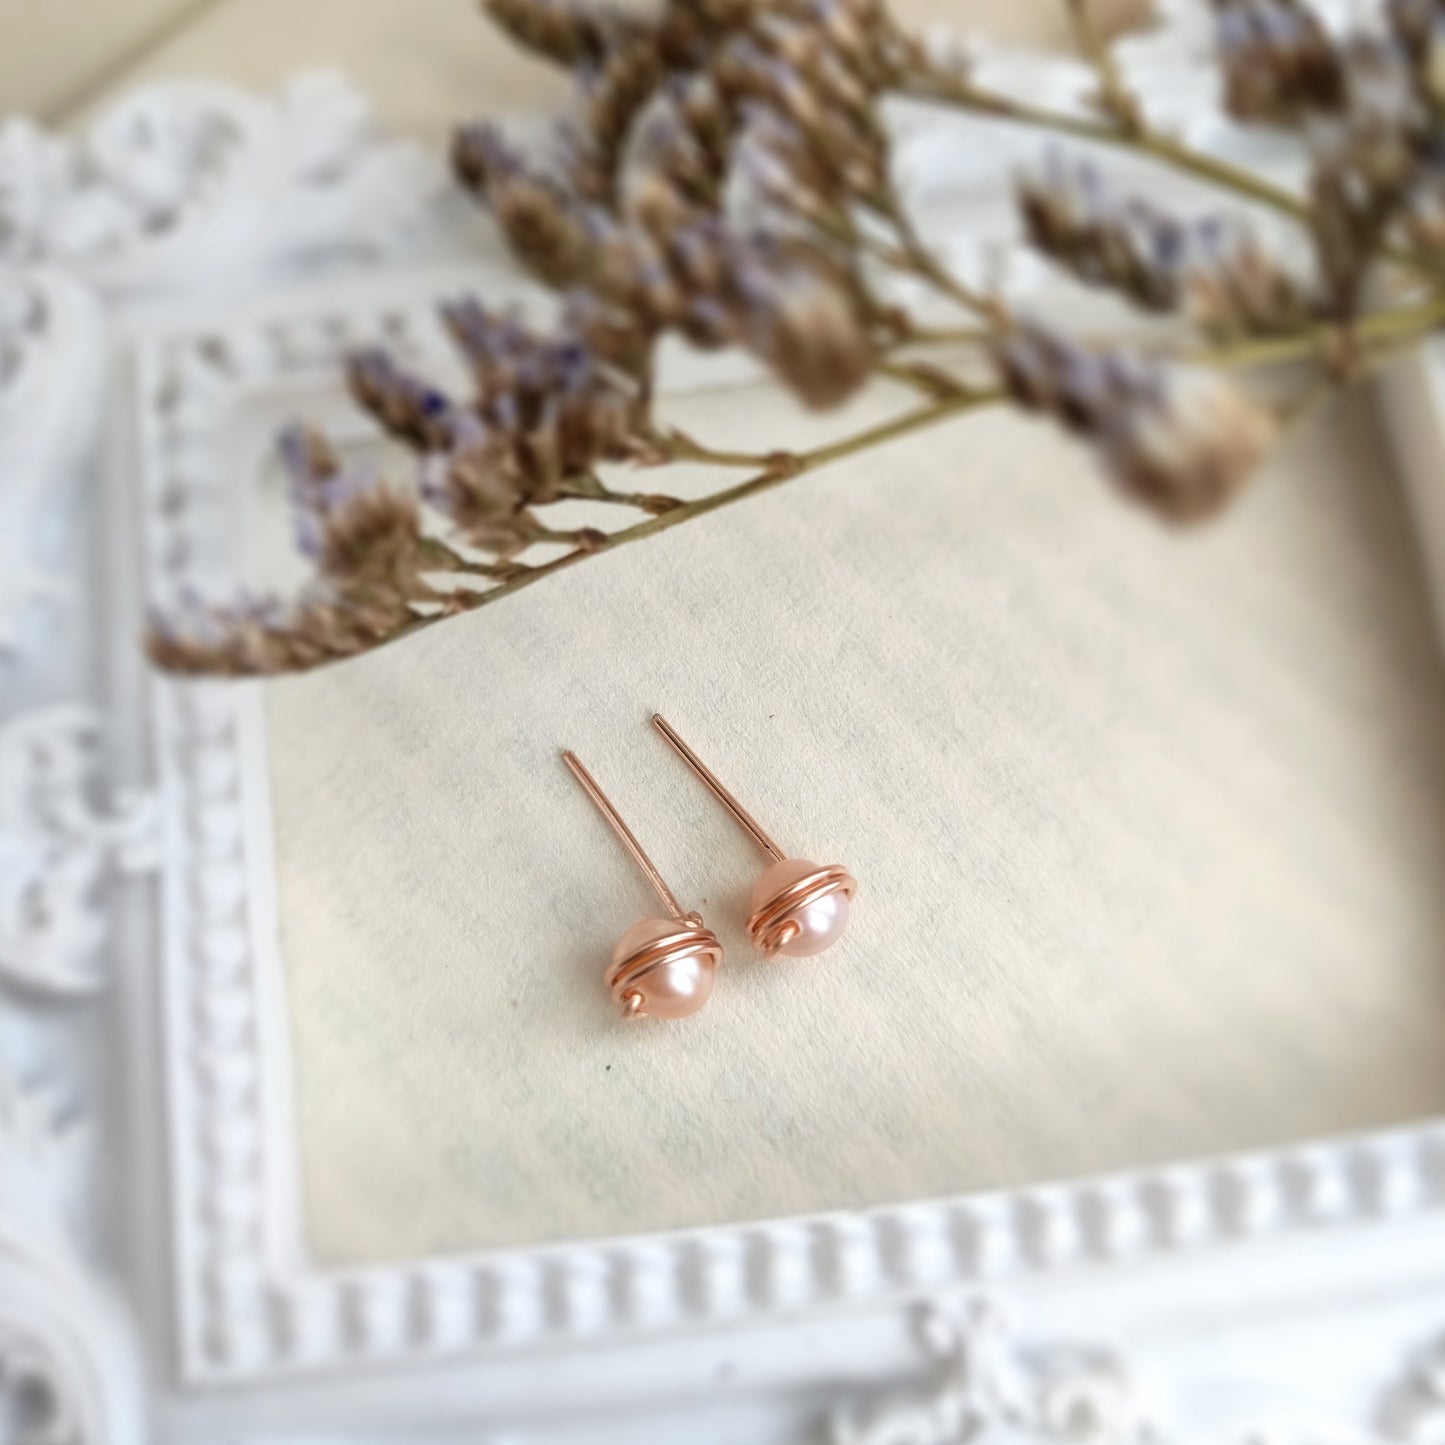 Tiny Pink Pearl Stud Earrings 14K Rose Gold Filled